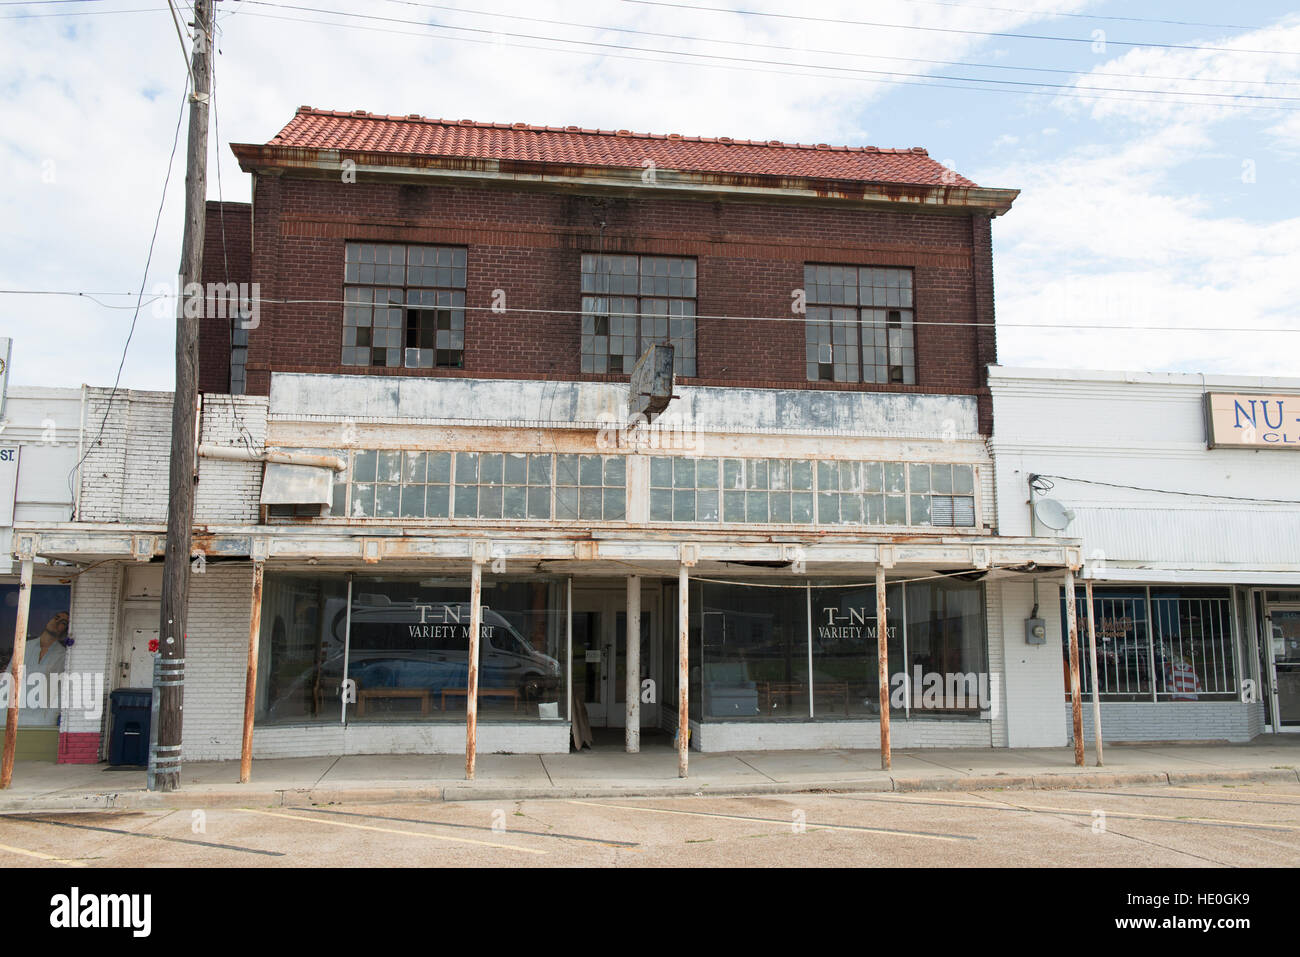 Abandoned building in the small southern town of Tallulah, Louisiana. Stock Photo